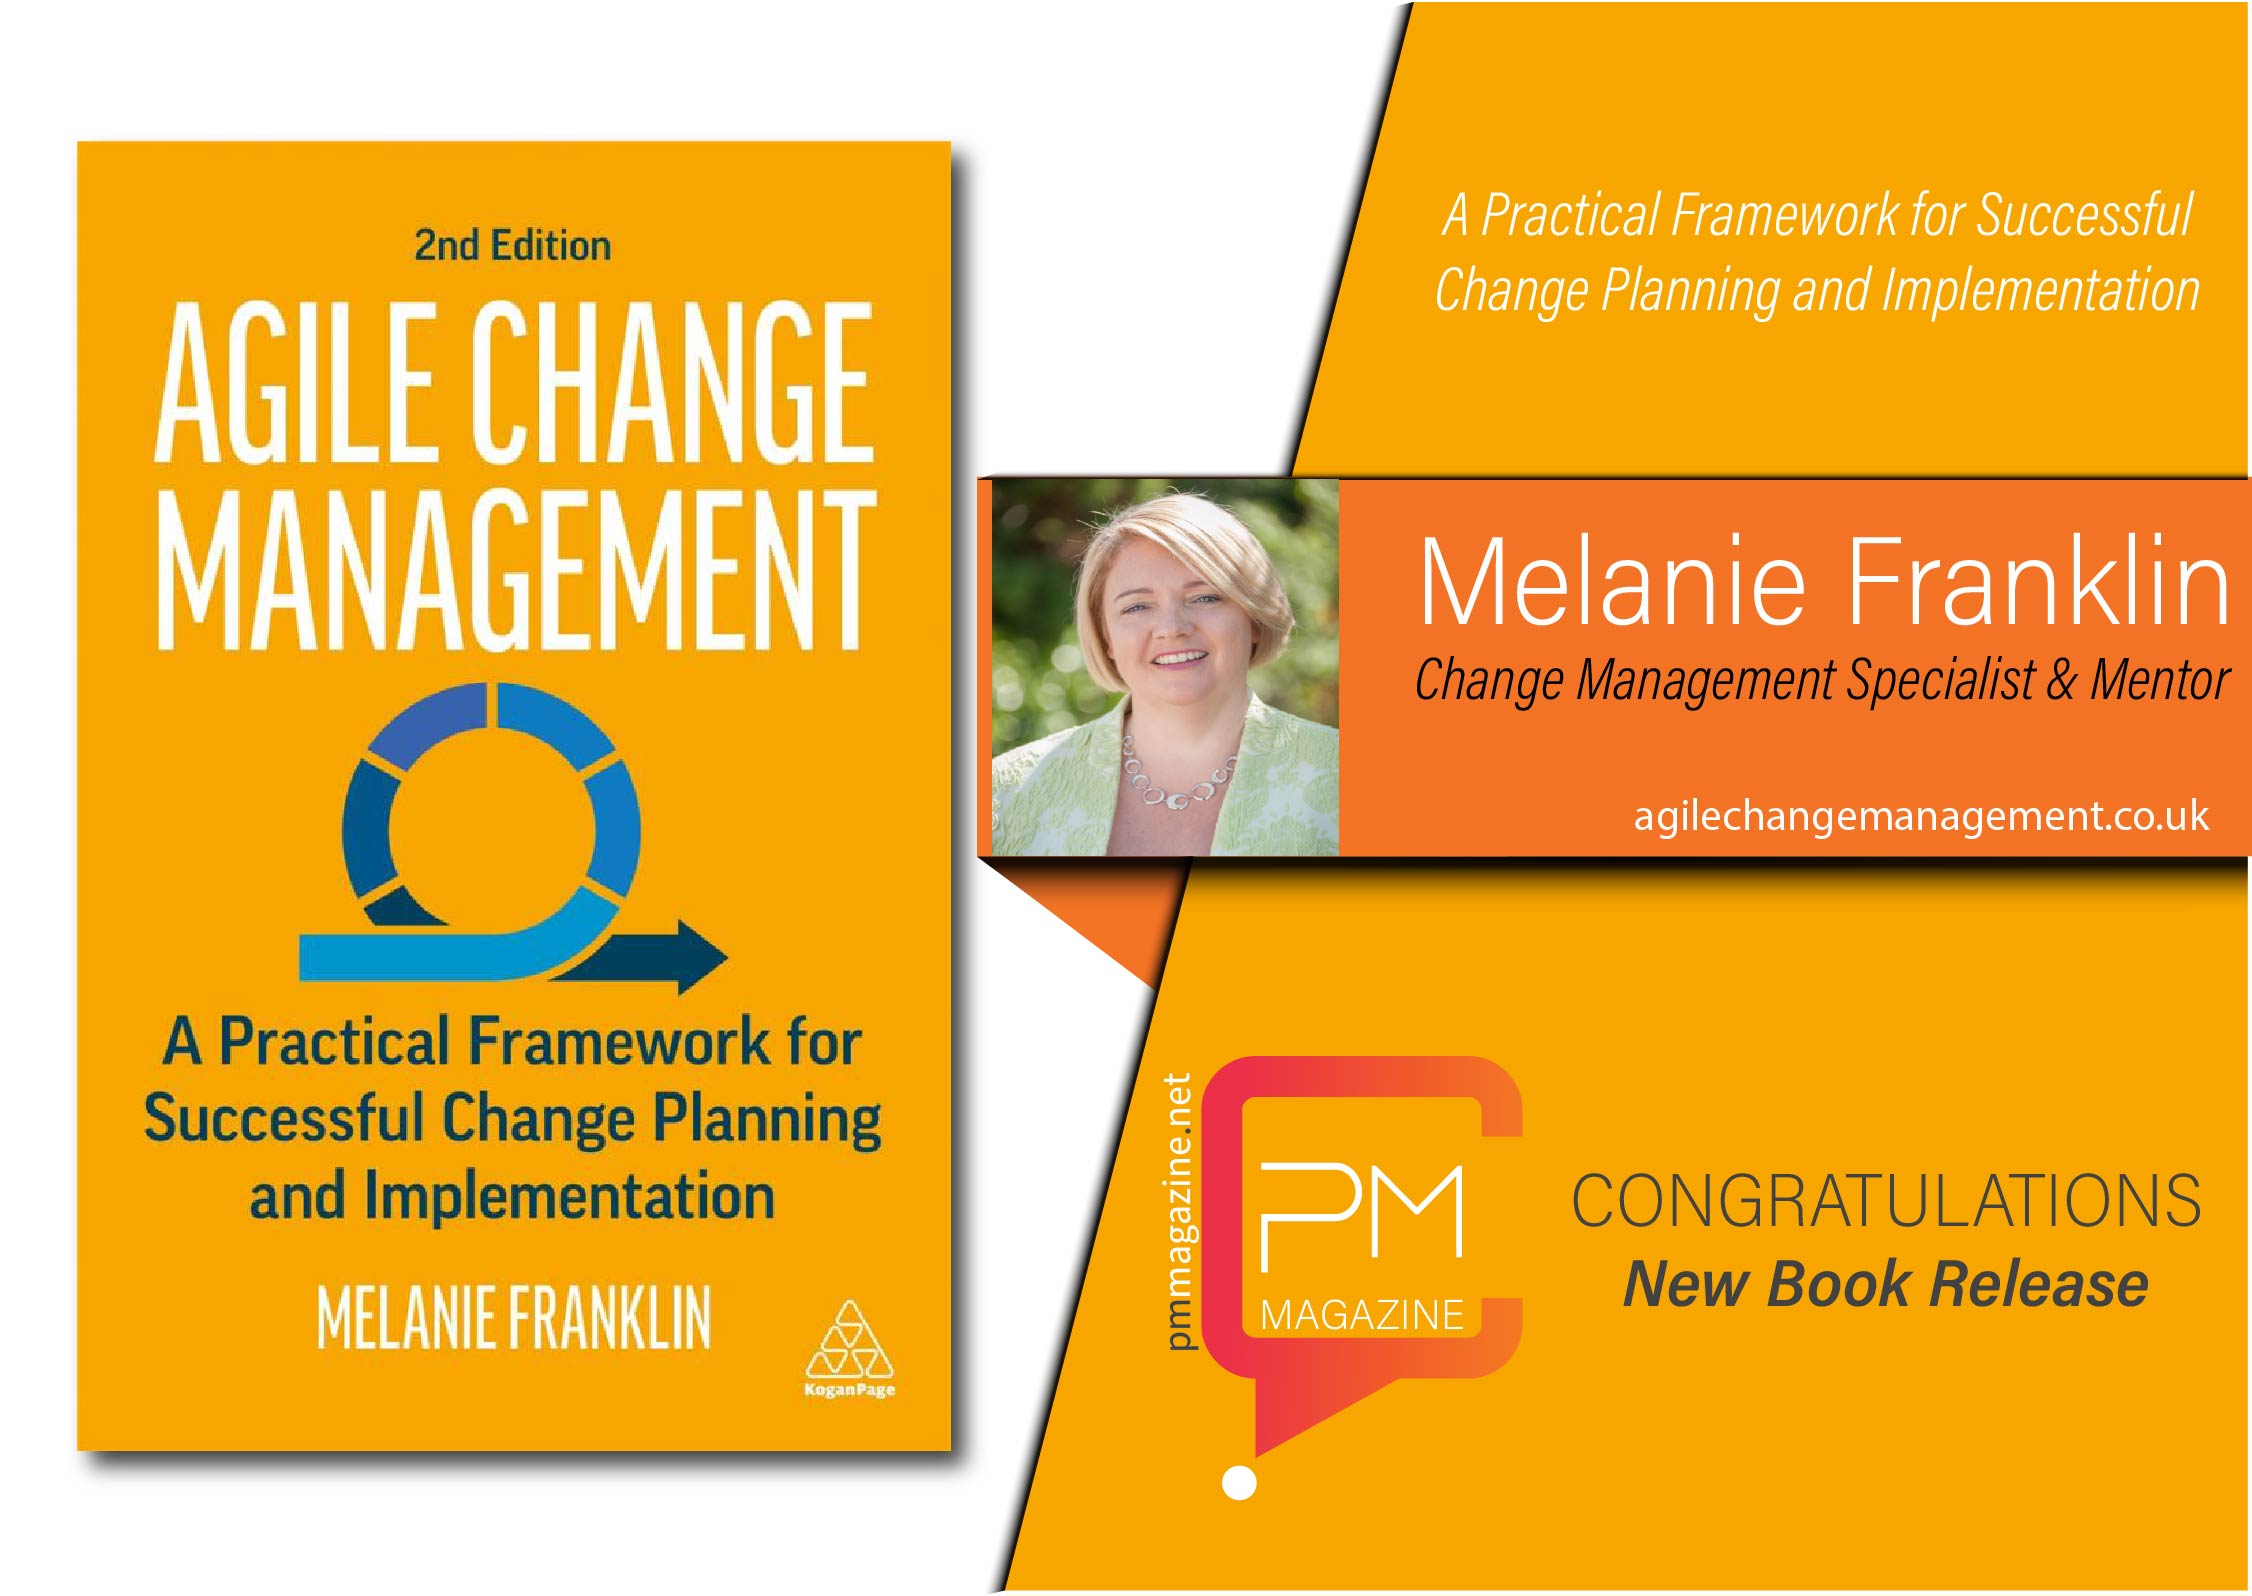 New Book Release | Agile Change Management